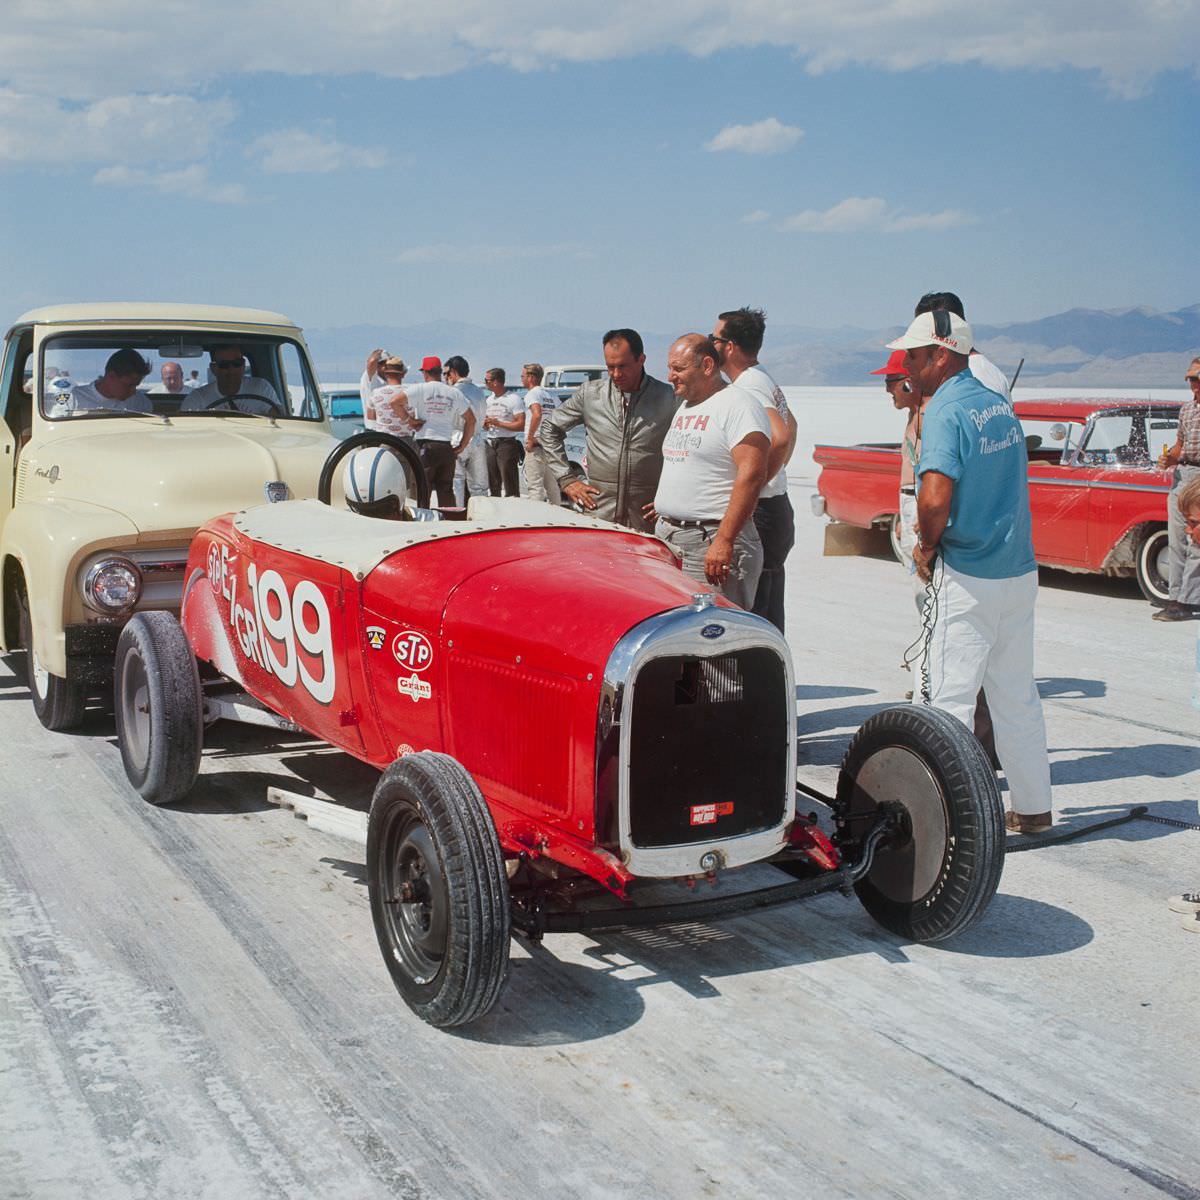 The Ratliff & Zook E/Gas Roadster, which posted a 158.45 mile per hour speed.